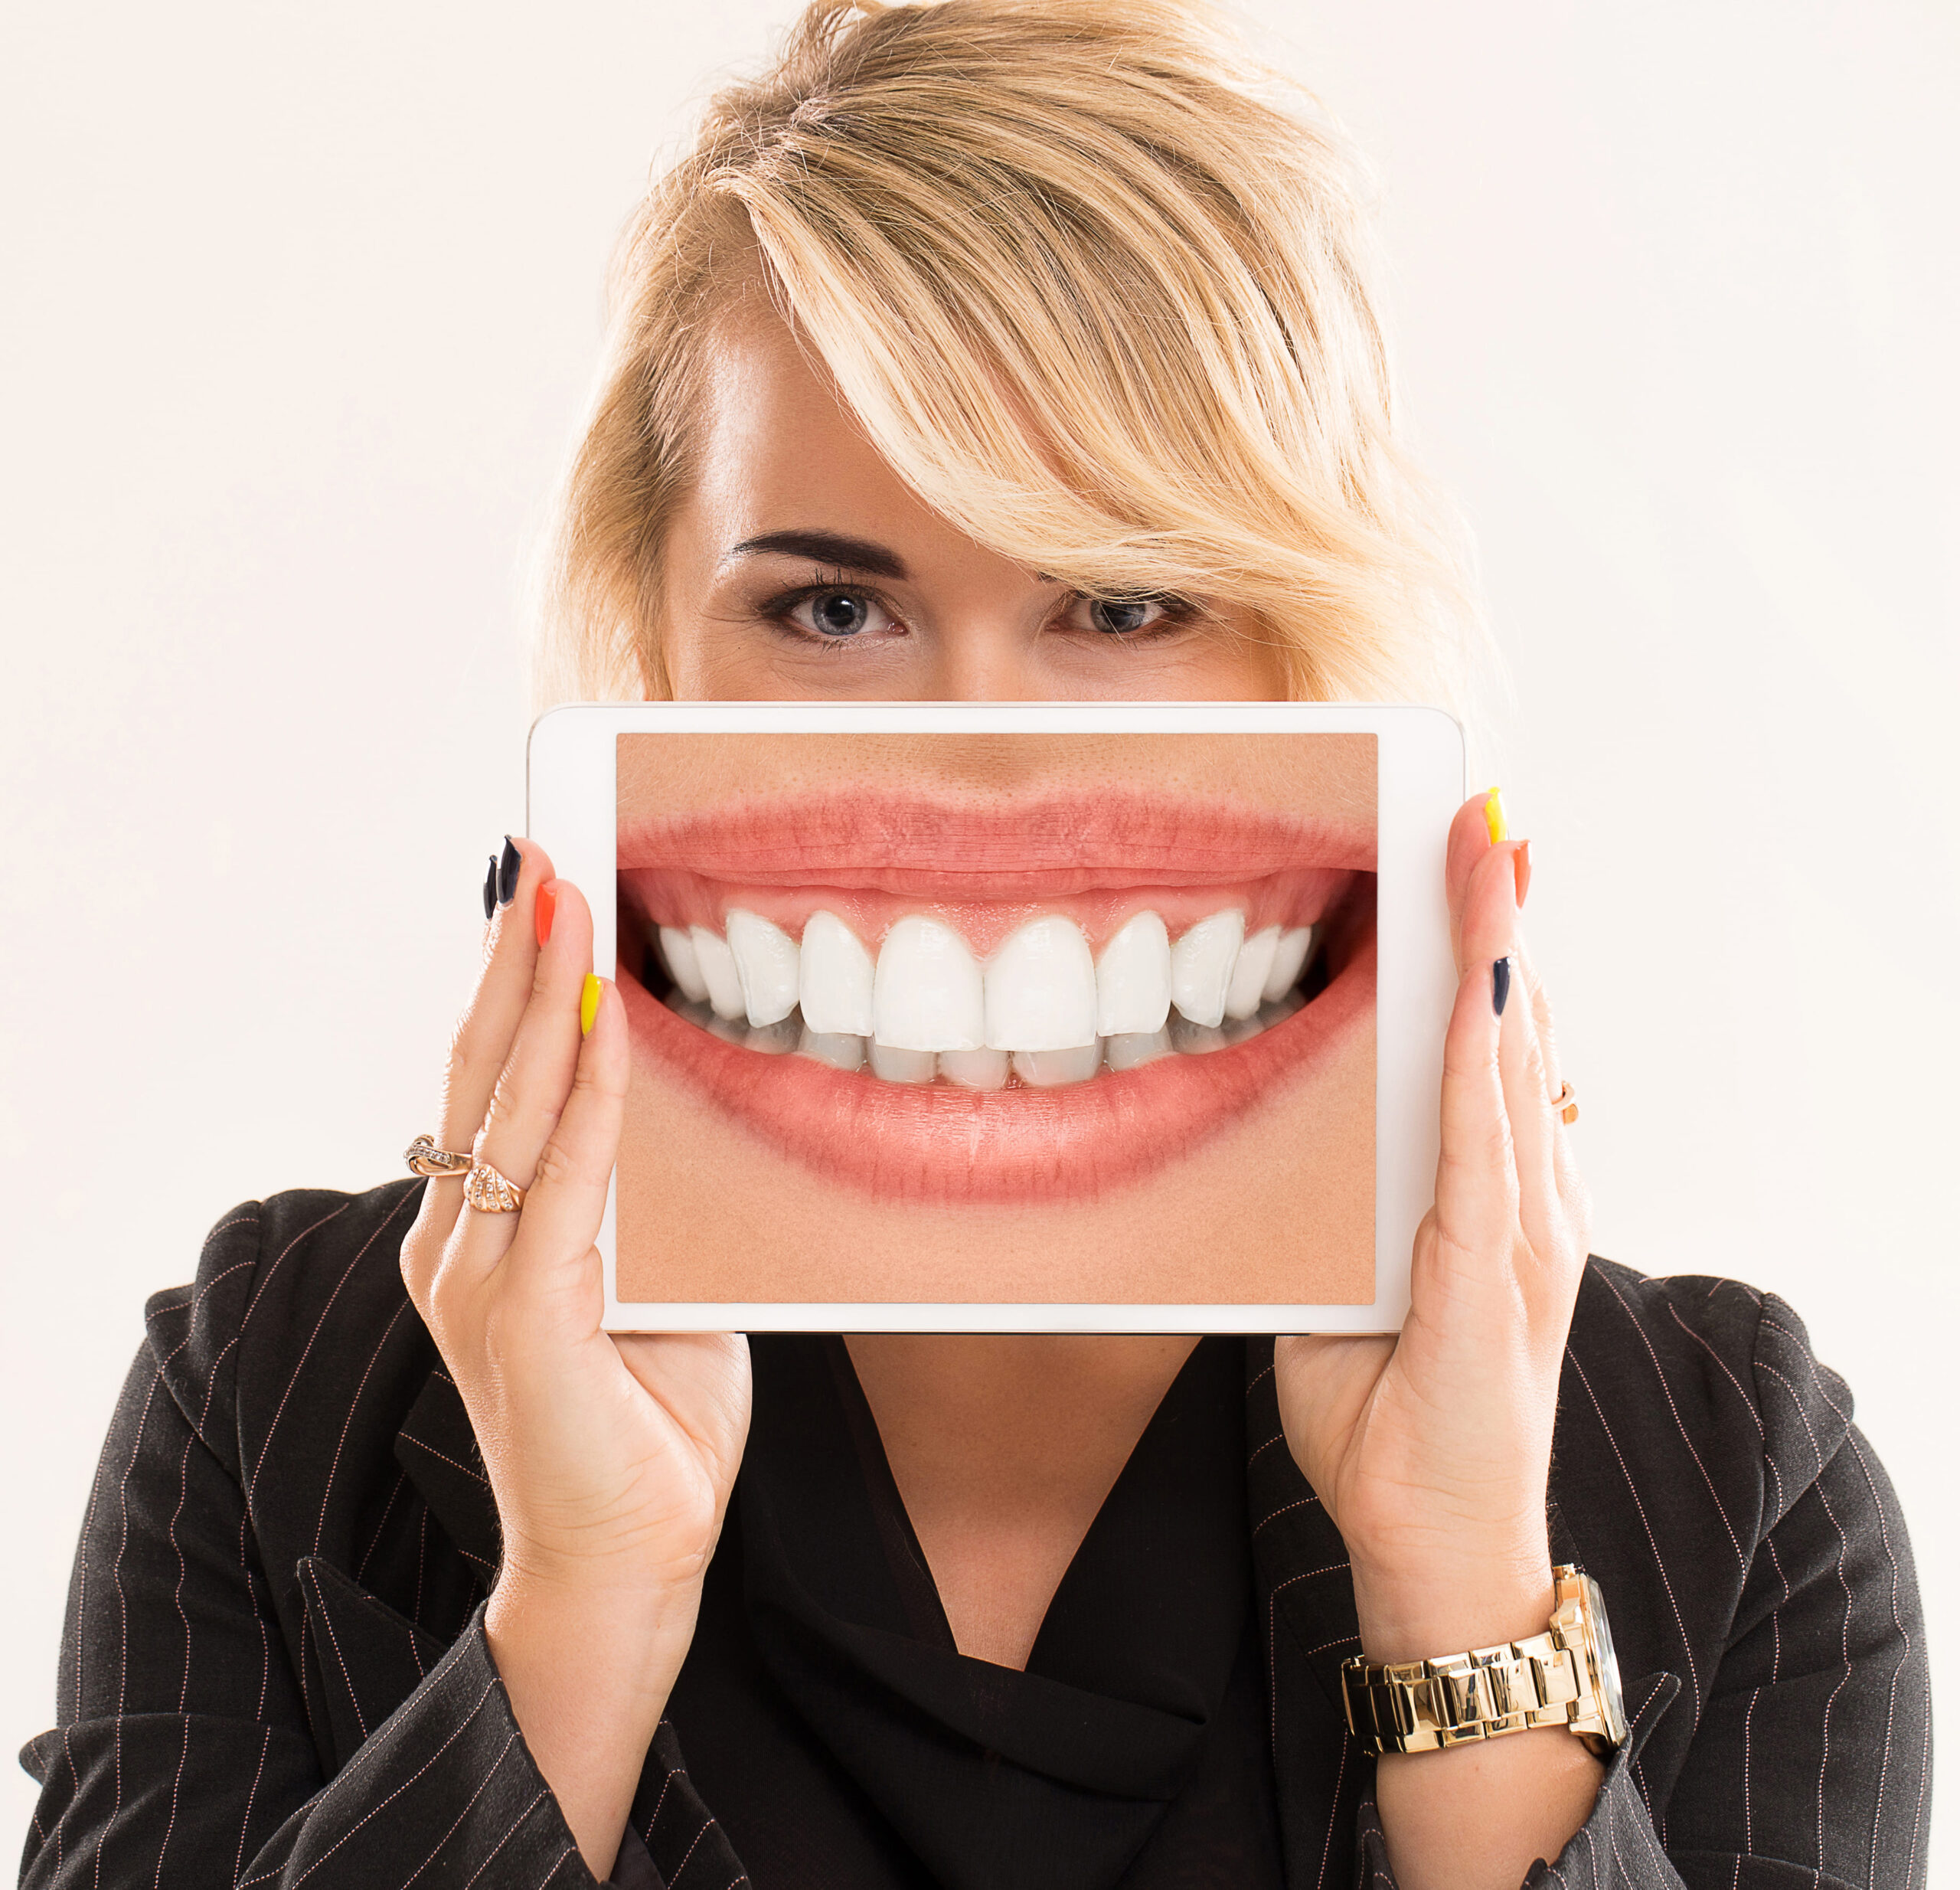 4 Most Common Questions About Teeth Whitening